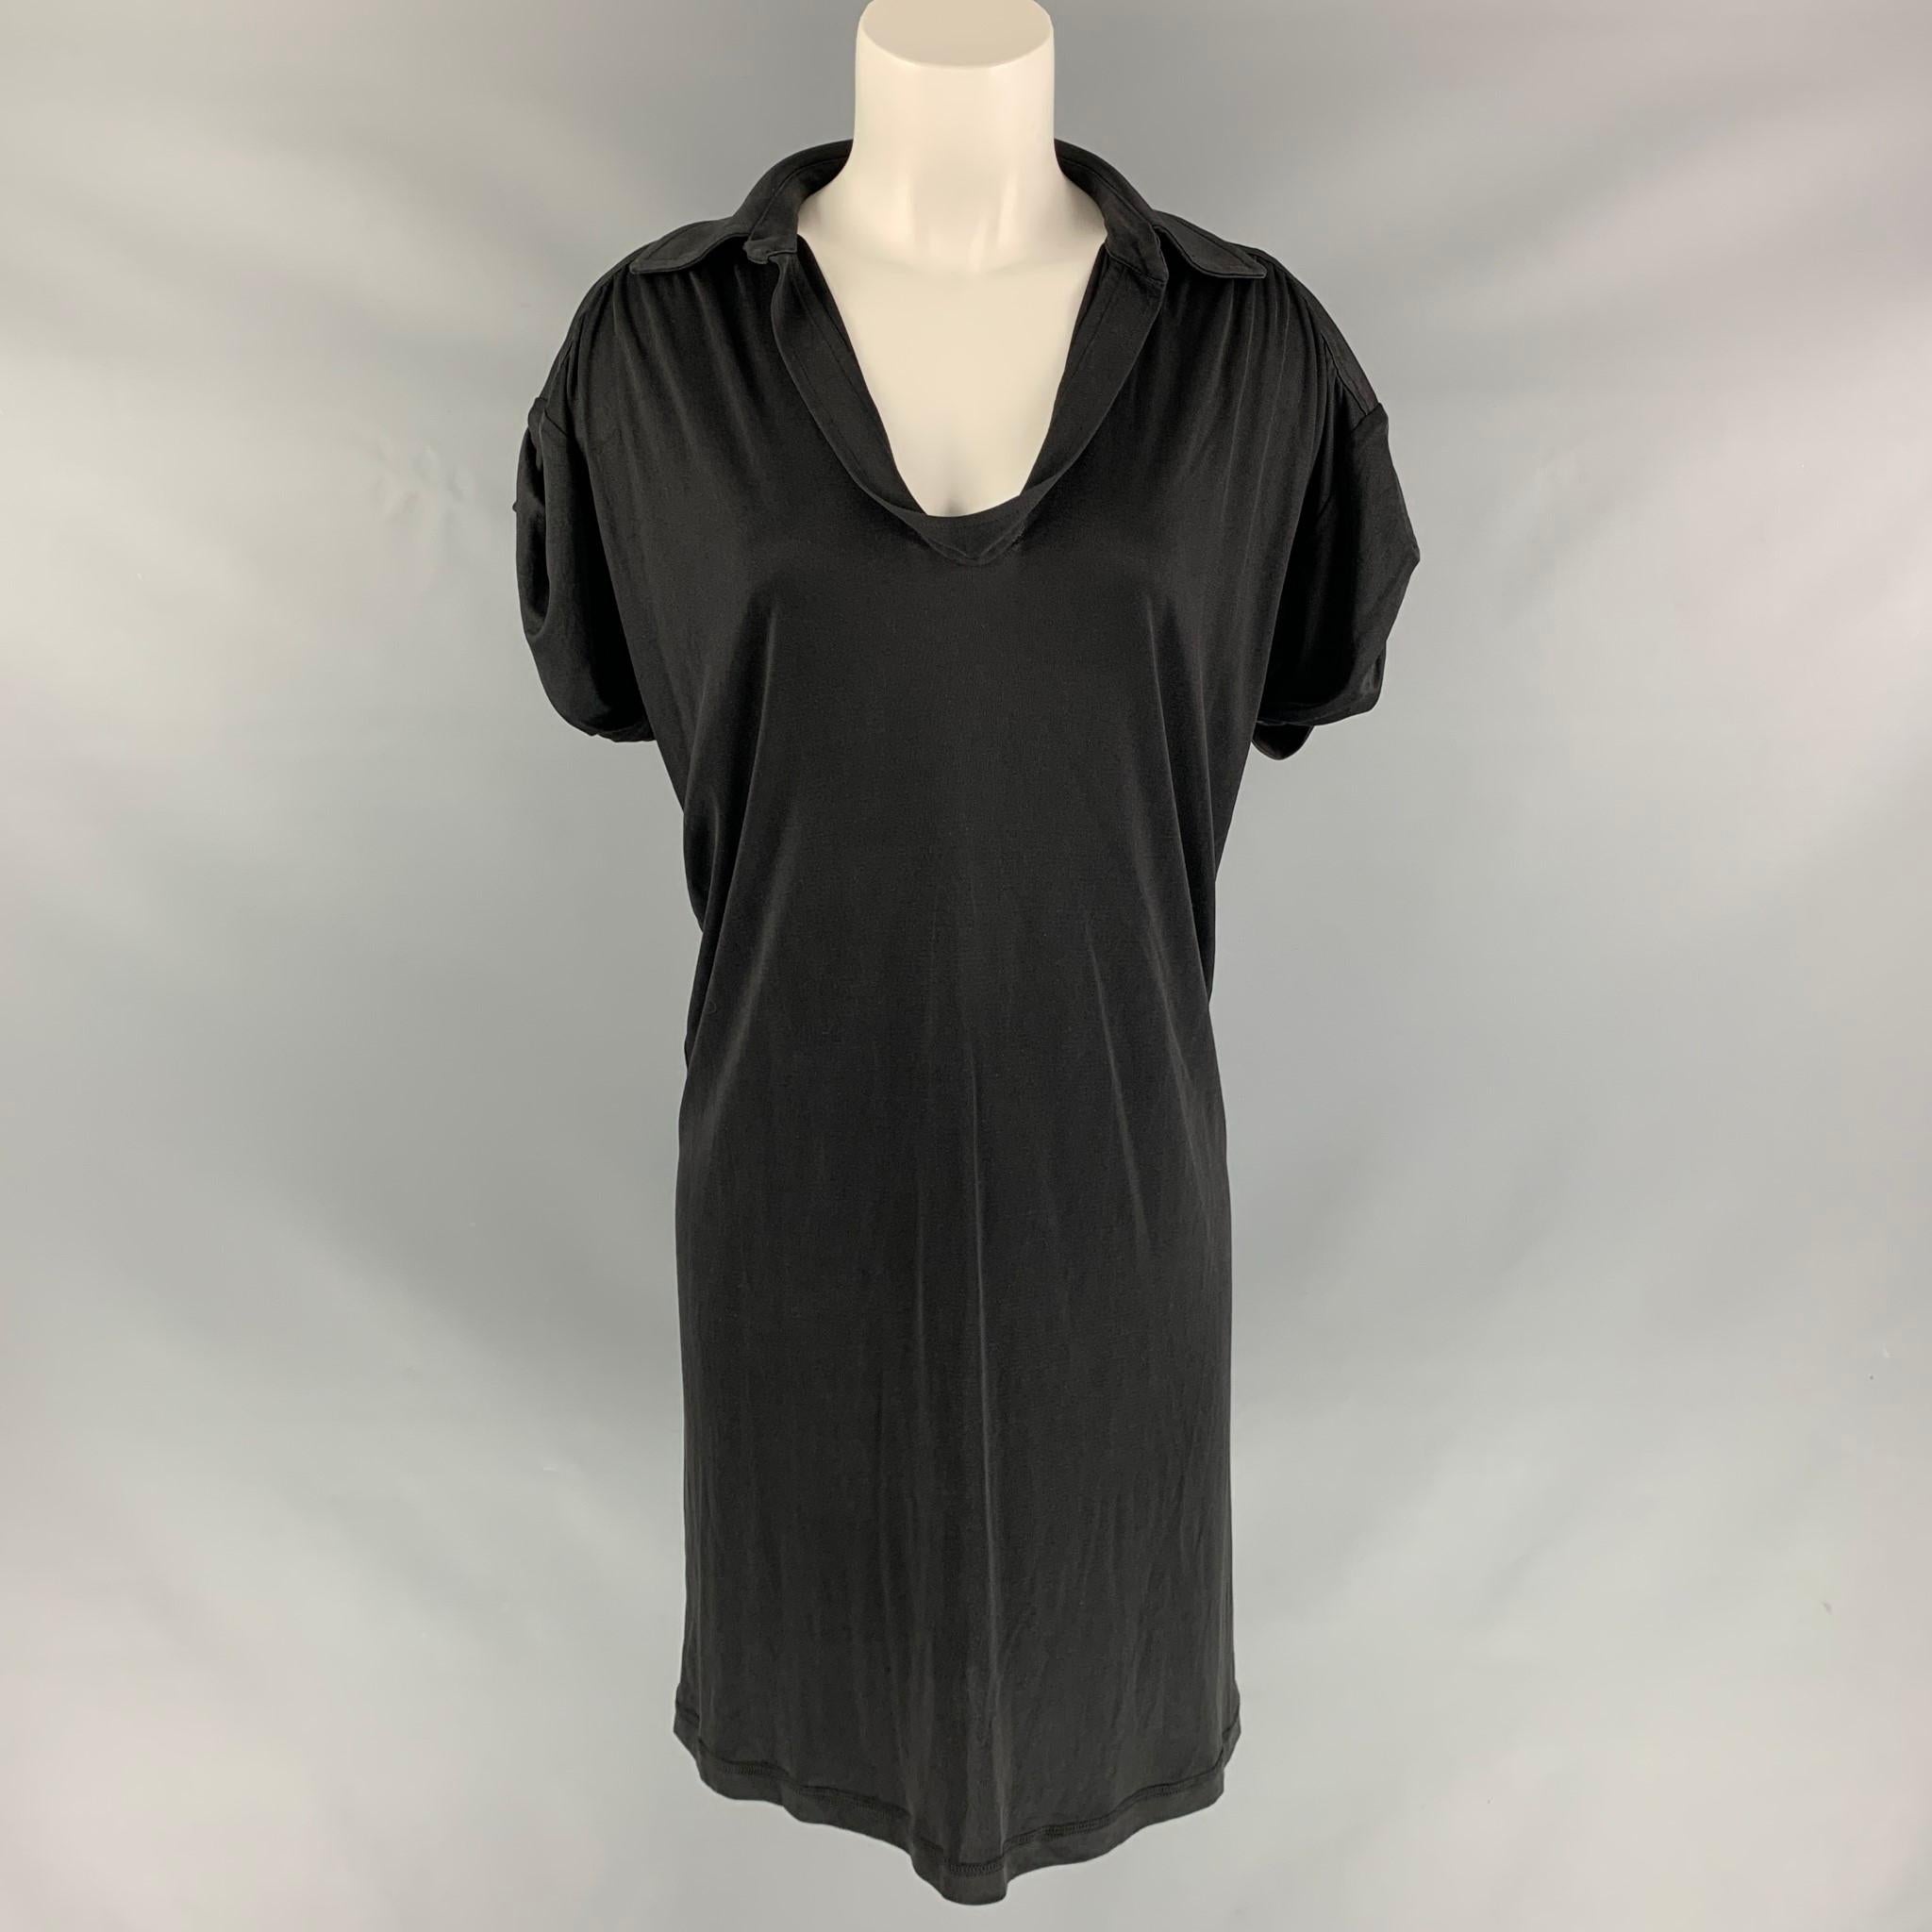 DEREK LAM V-neck t-shirt, bellow knee dress comes in black silk. Made in Italy.

Excellent Pre- Owned Conditions.
Marked: 6

Measurements:

Shoulder: 19 in.
Bust: 46 in.
Waist: 46 in.
Hip: 46 in.
Sleeve: 2 in.
Length: 38 in.  

SKU: 113413
Category: